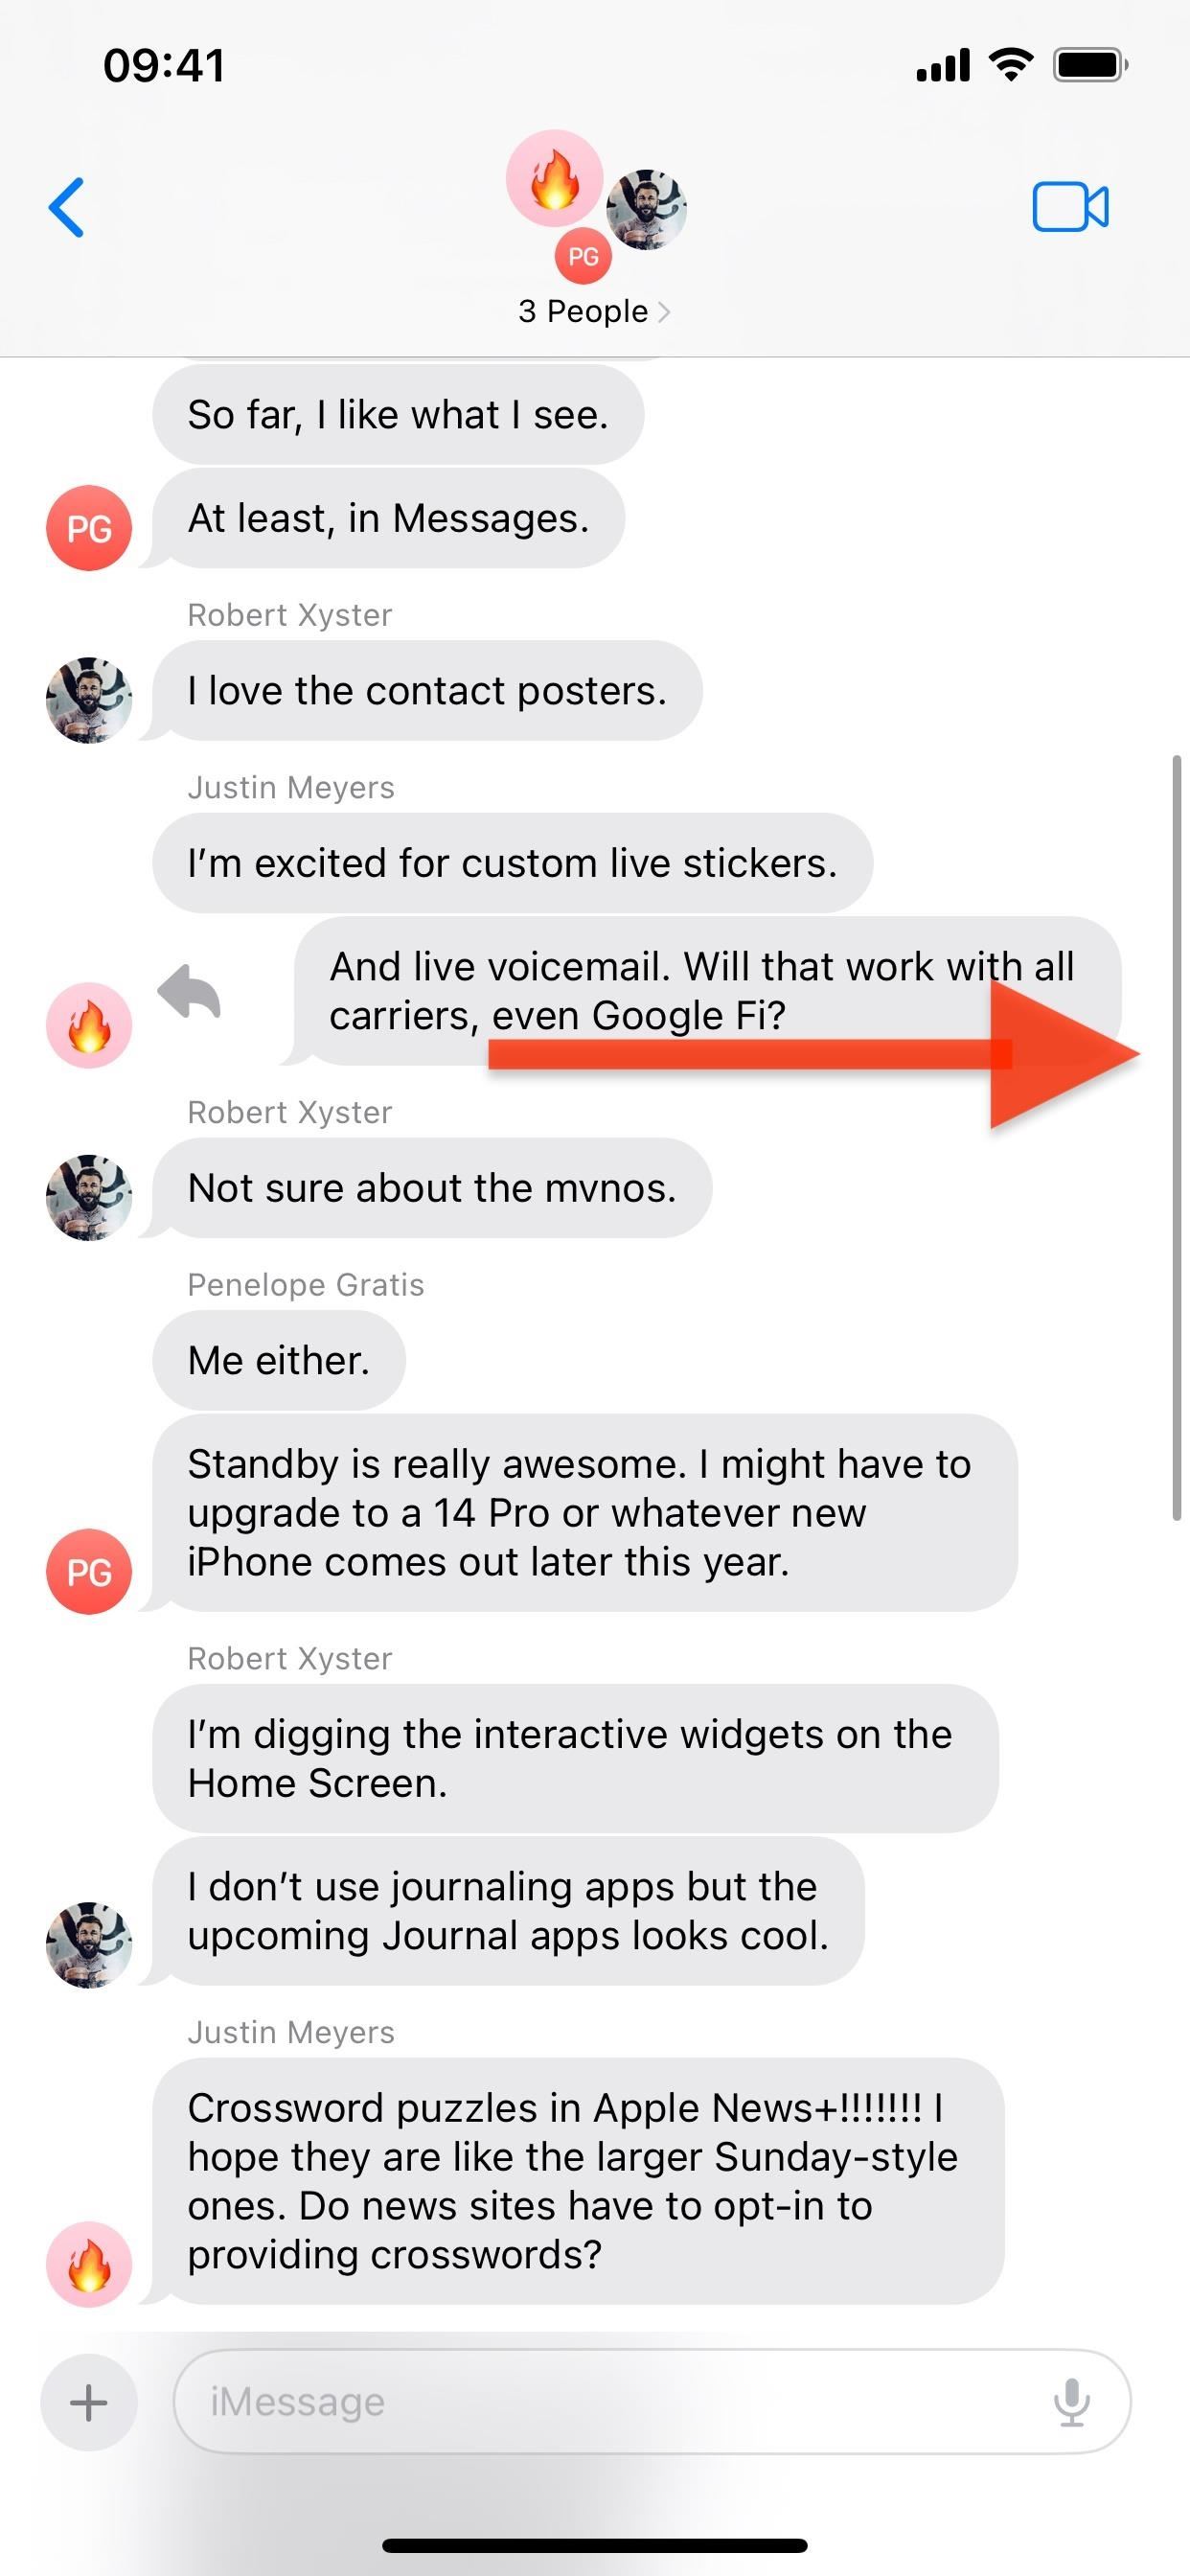 12 Things That'll Make Messaging on Your iPhone a Whole Lot Better